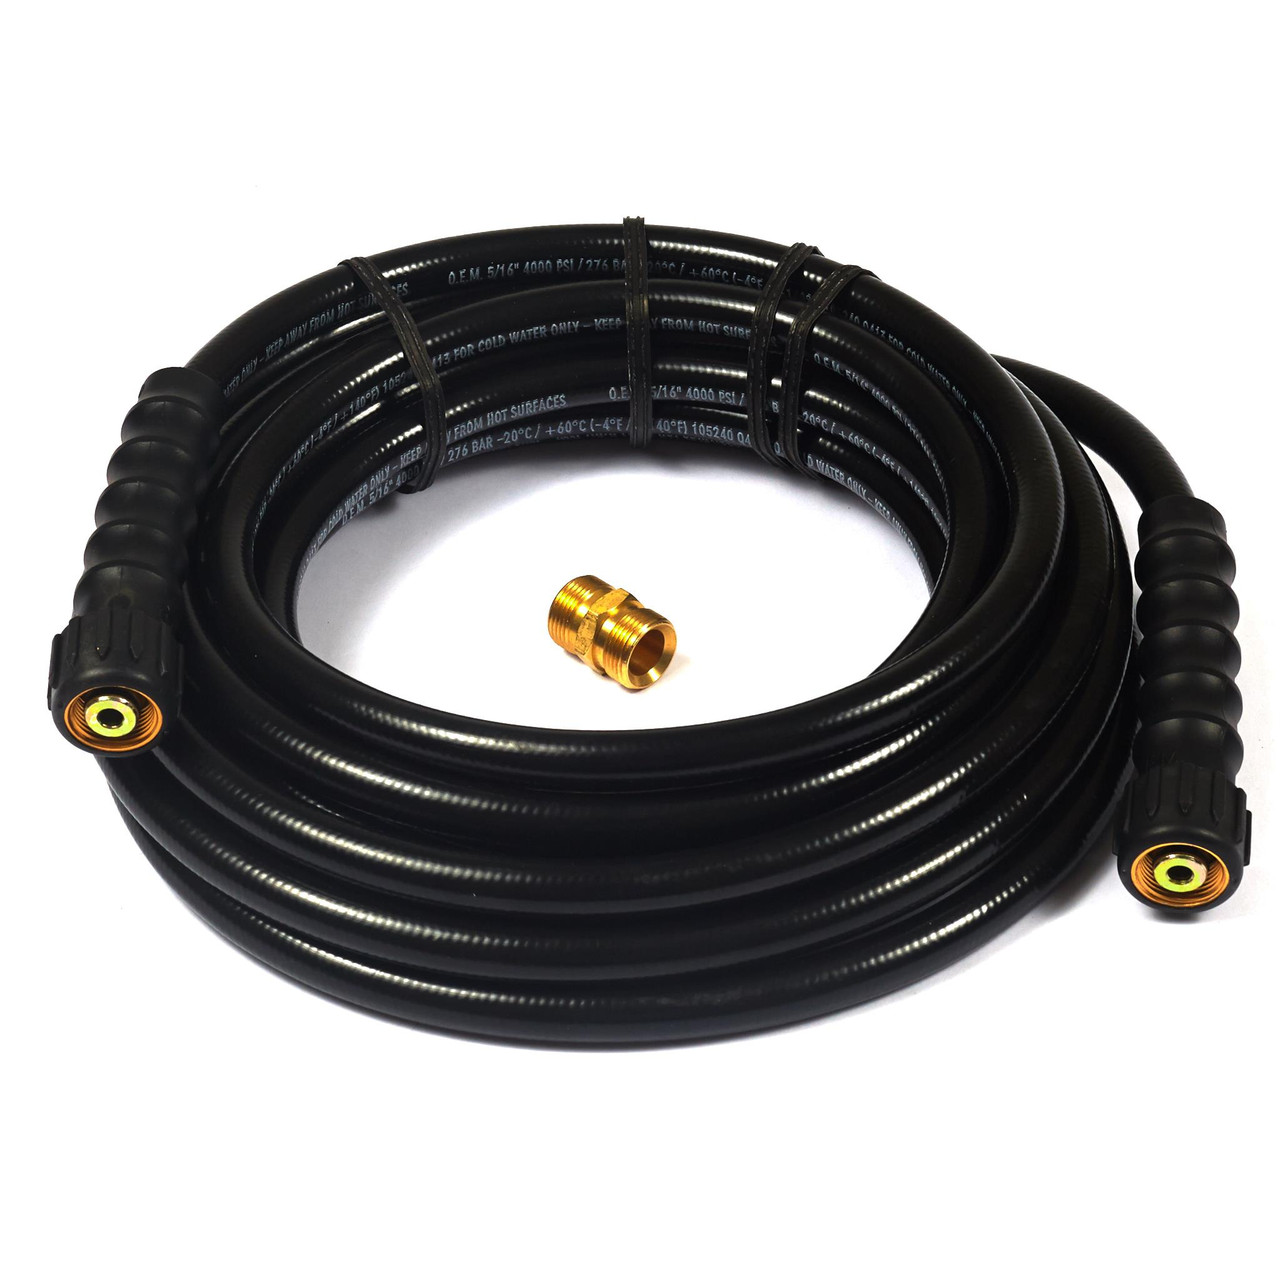 Briggs & Stratton 6189 Pressure Washer Replacement and Extension Hose, 25-Feet